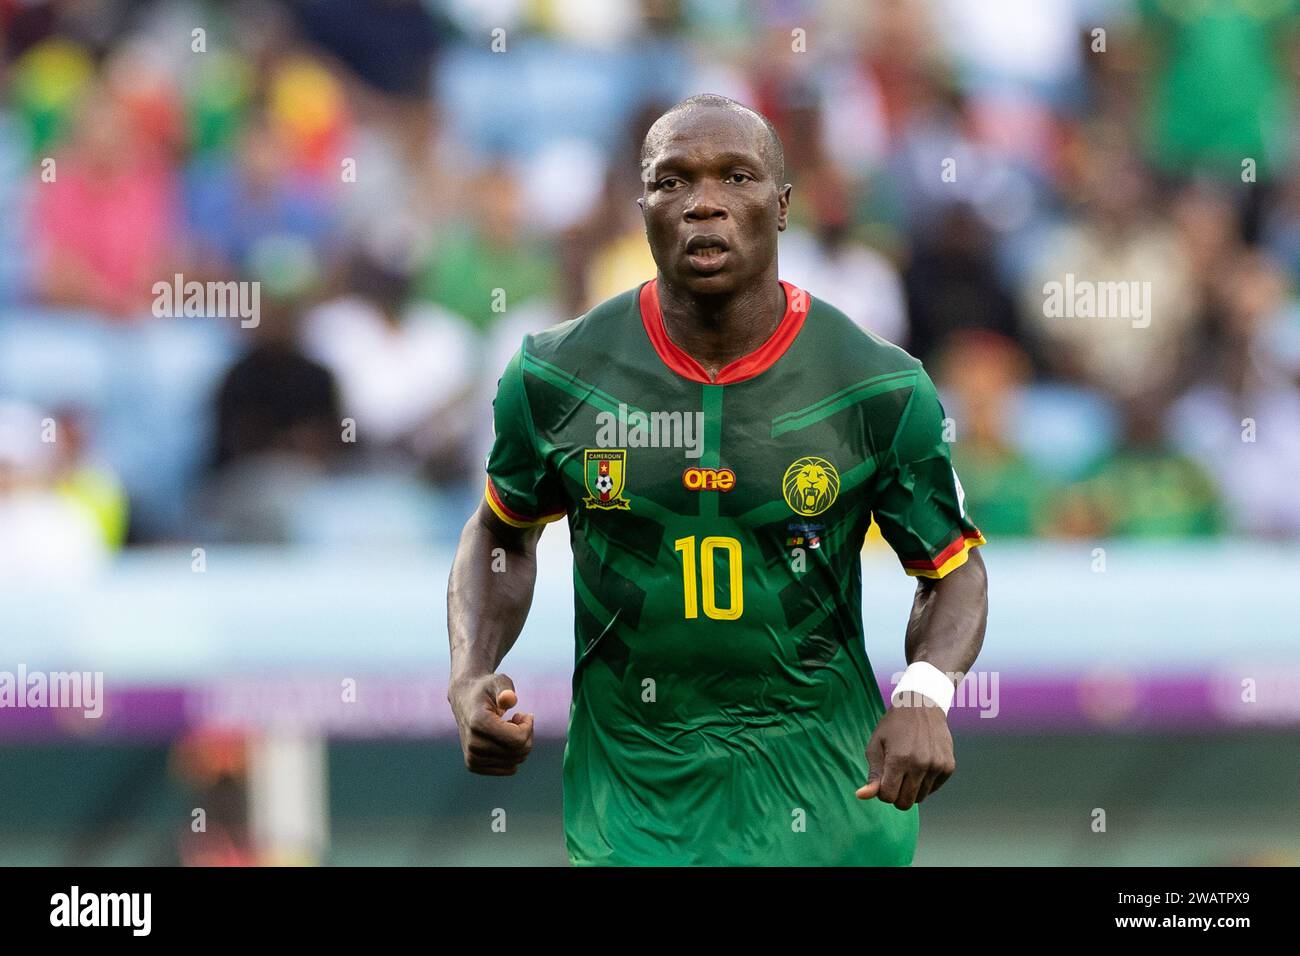 Qatar, Qatar. 28th Nov, 2022. Vincent Aboubakar of Cameroon seen in action during the FIFA World Cup Qatar 2022 match between Cameroon and Serbia at Al Janoub Stadium. Final score: Cameroon 3:3 Serbia. (Photo by Grzegorz Wajda/SOPA Images/Sipa USA) Credit: Sipa USA/Alamy Live News Stock Photo